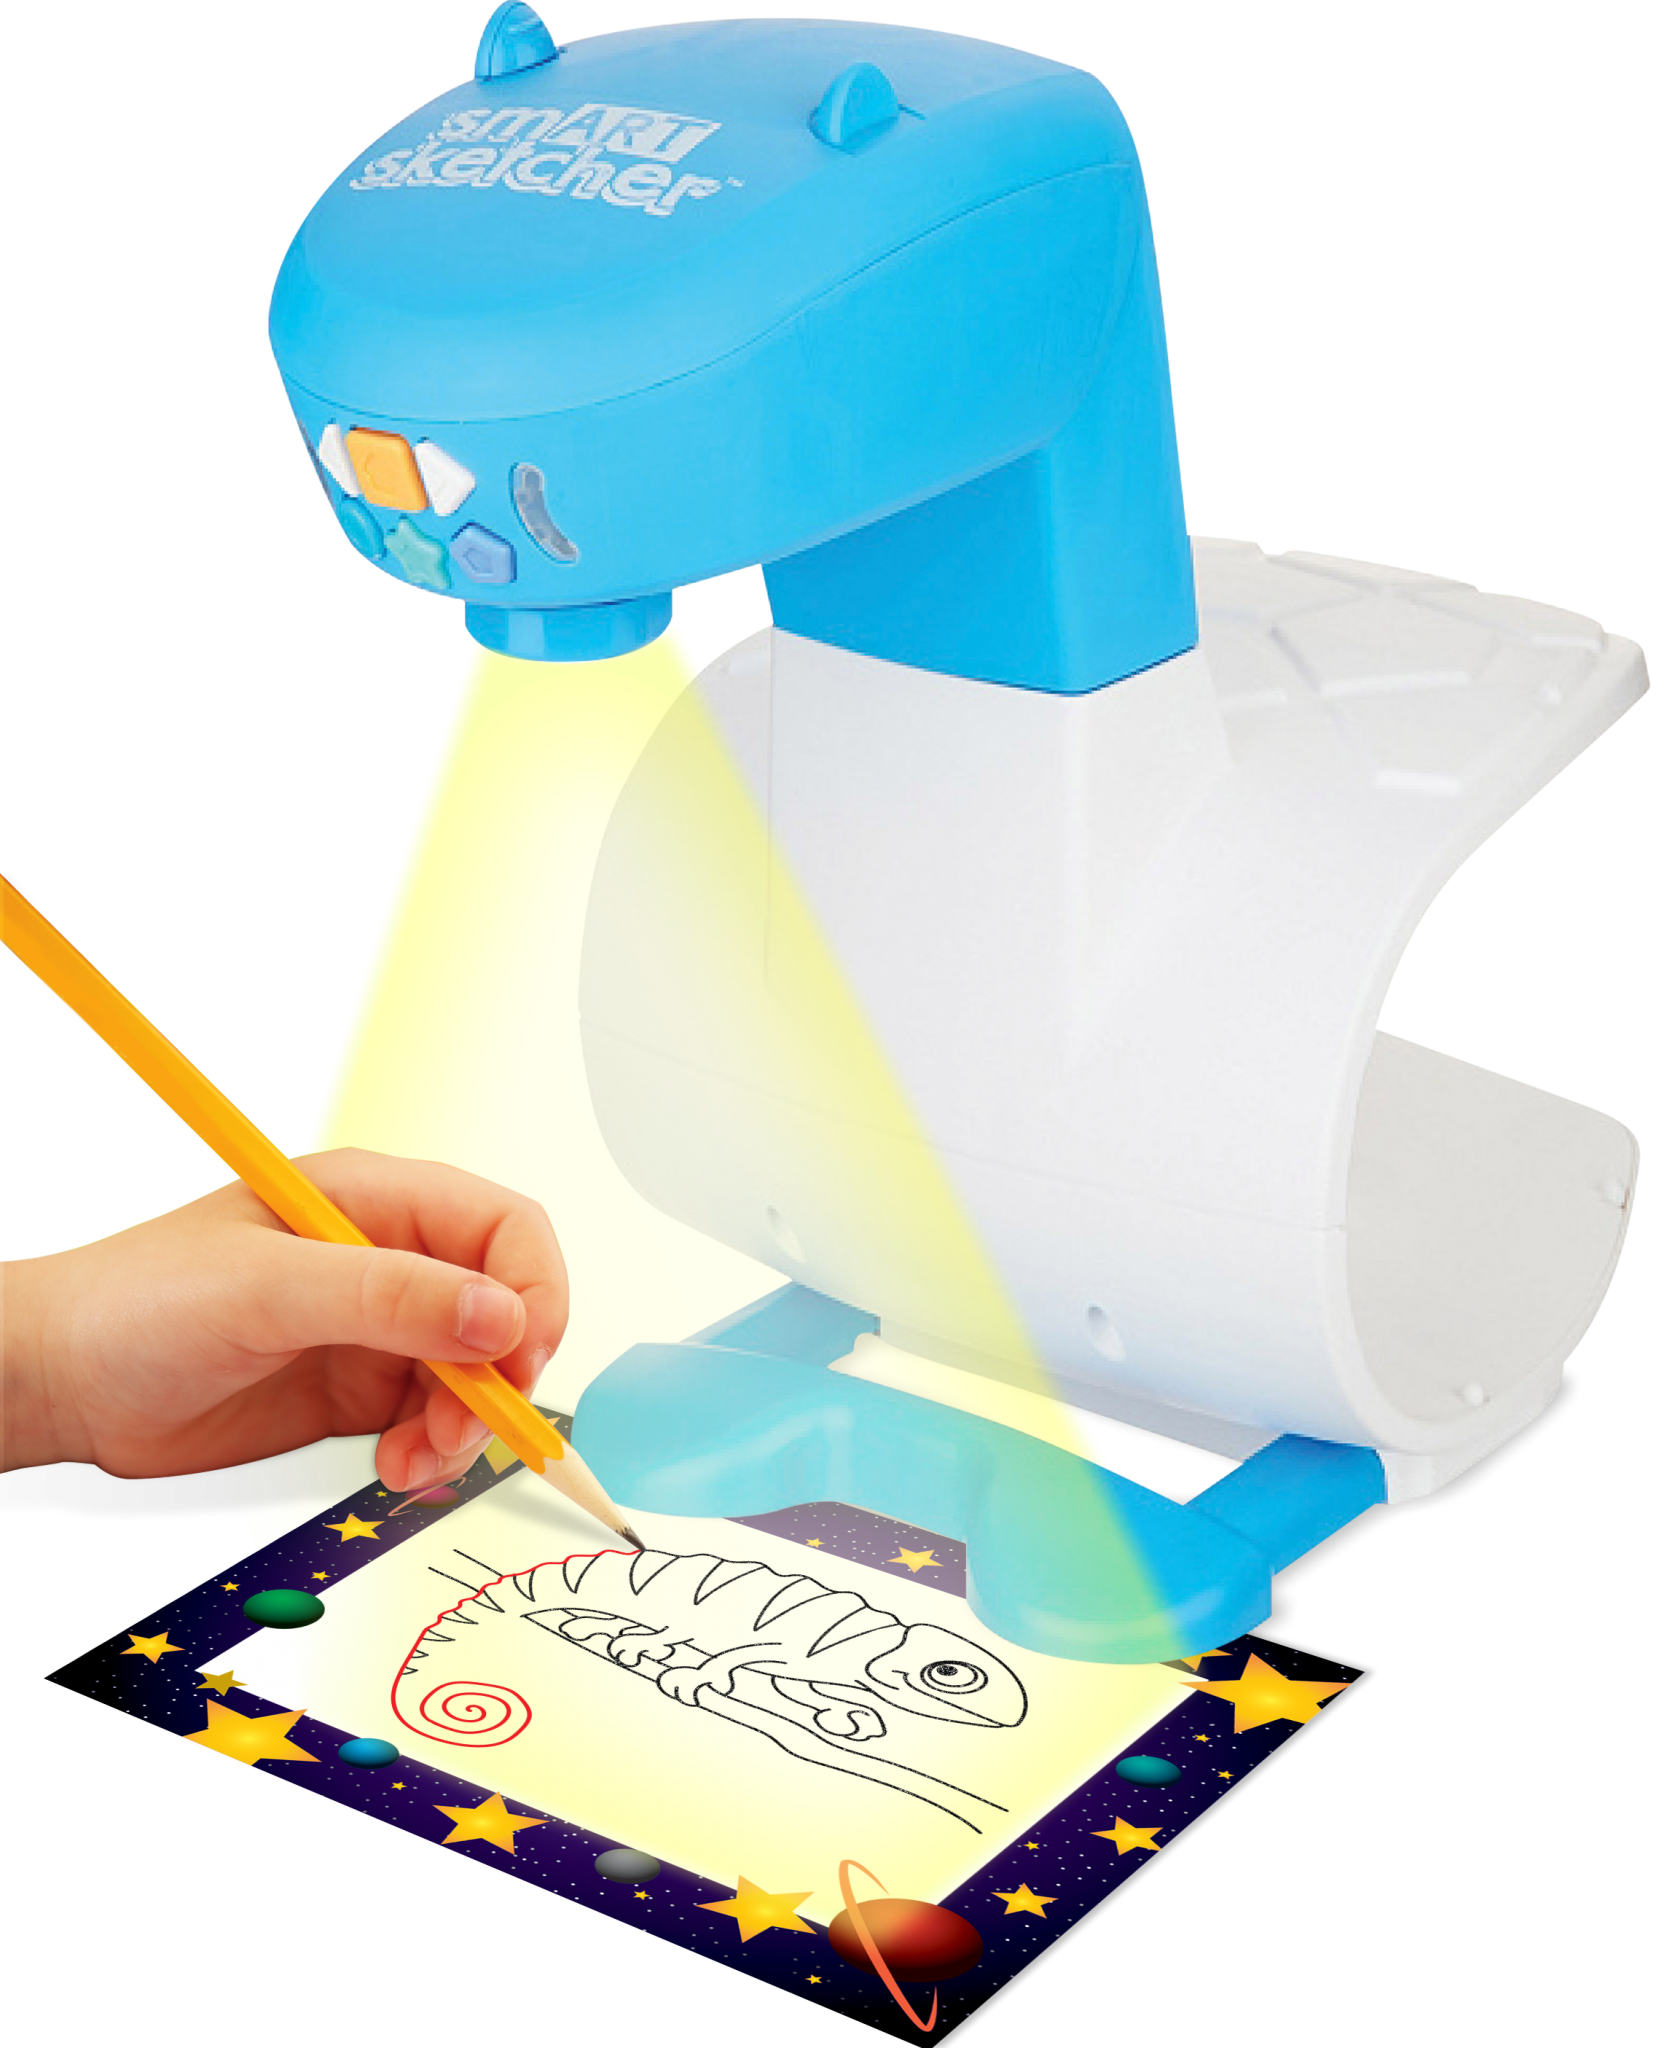 Smart Sketcher Projector - Ygrowup Toys1678 x 2048